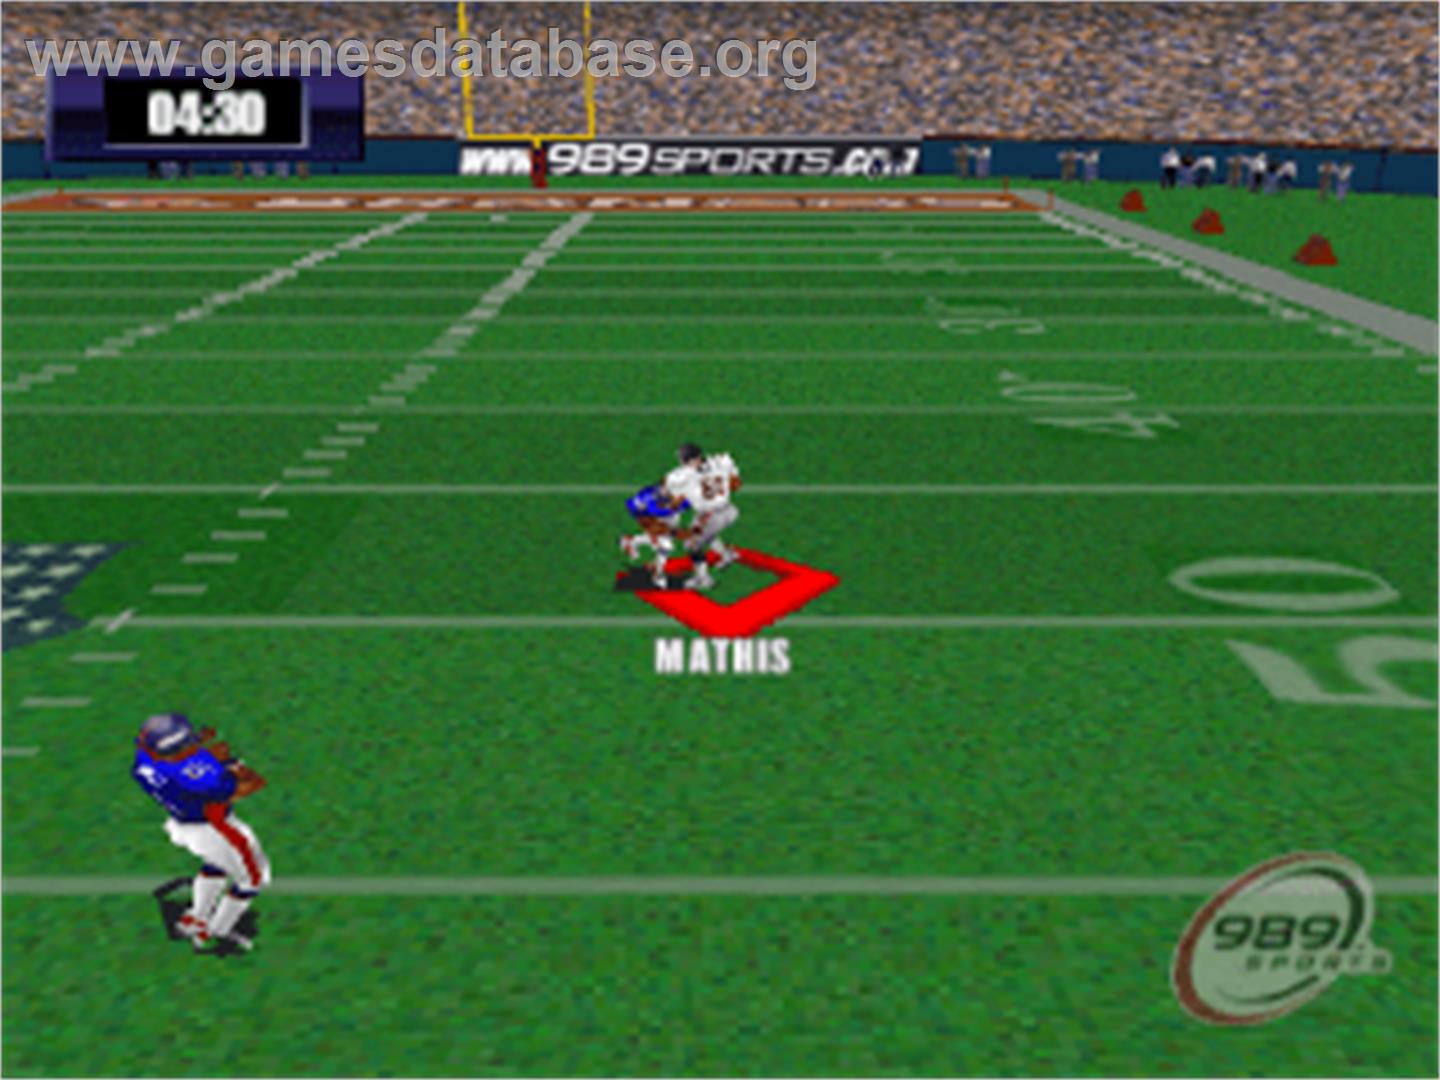 NFL GameDay 2000 - Sony Playstation - Artwork - In Game